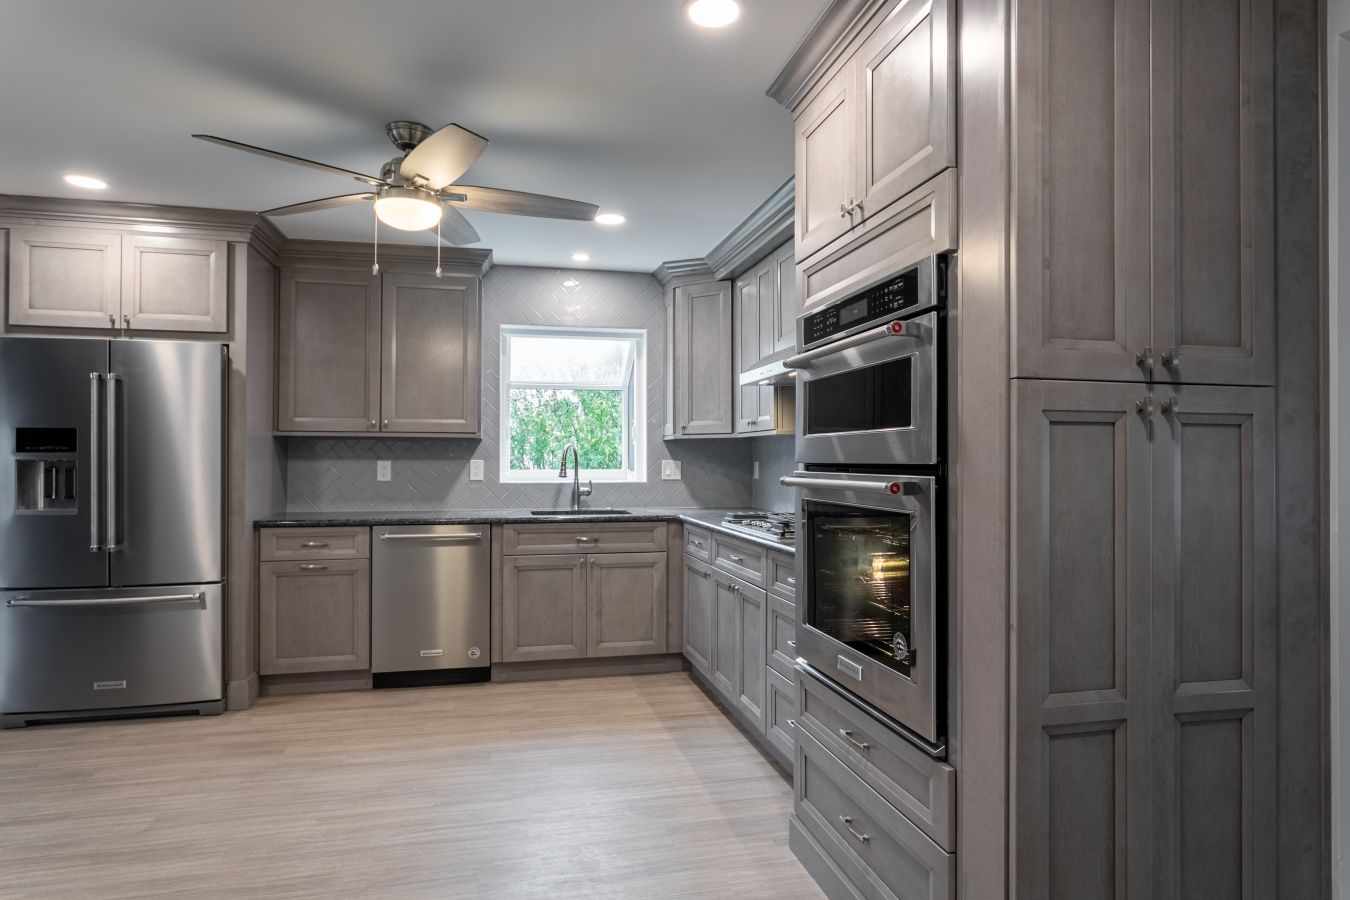 Kitchen with center island and gray cabinets from amiano and son